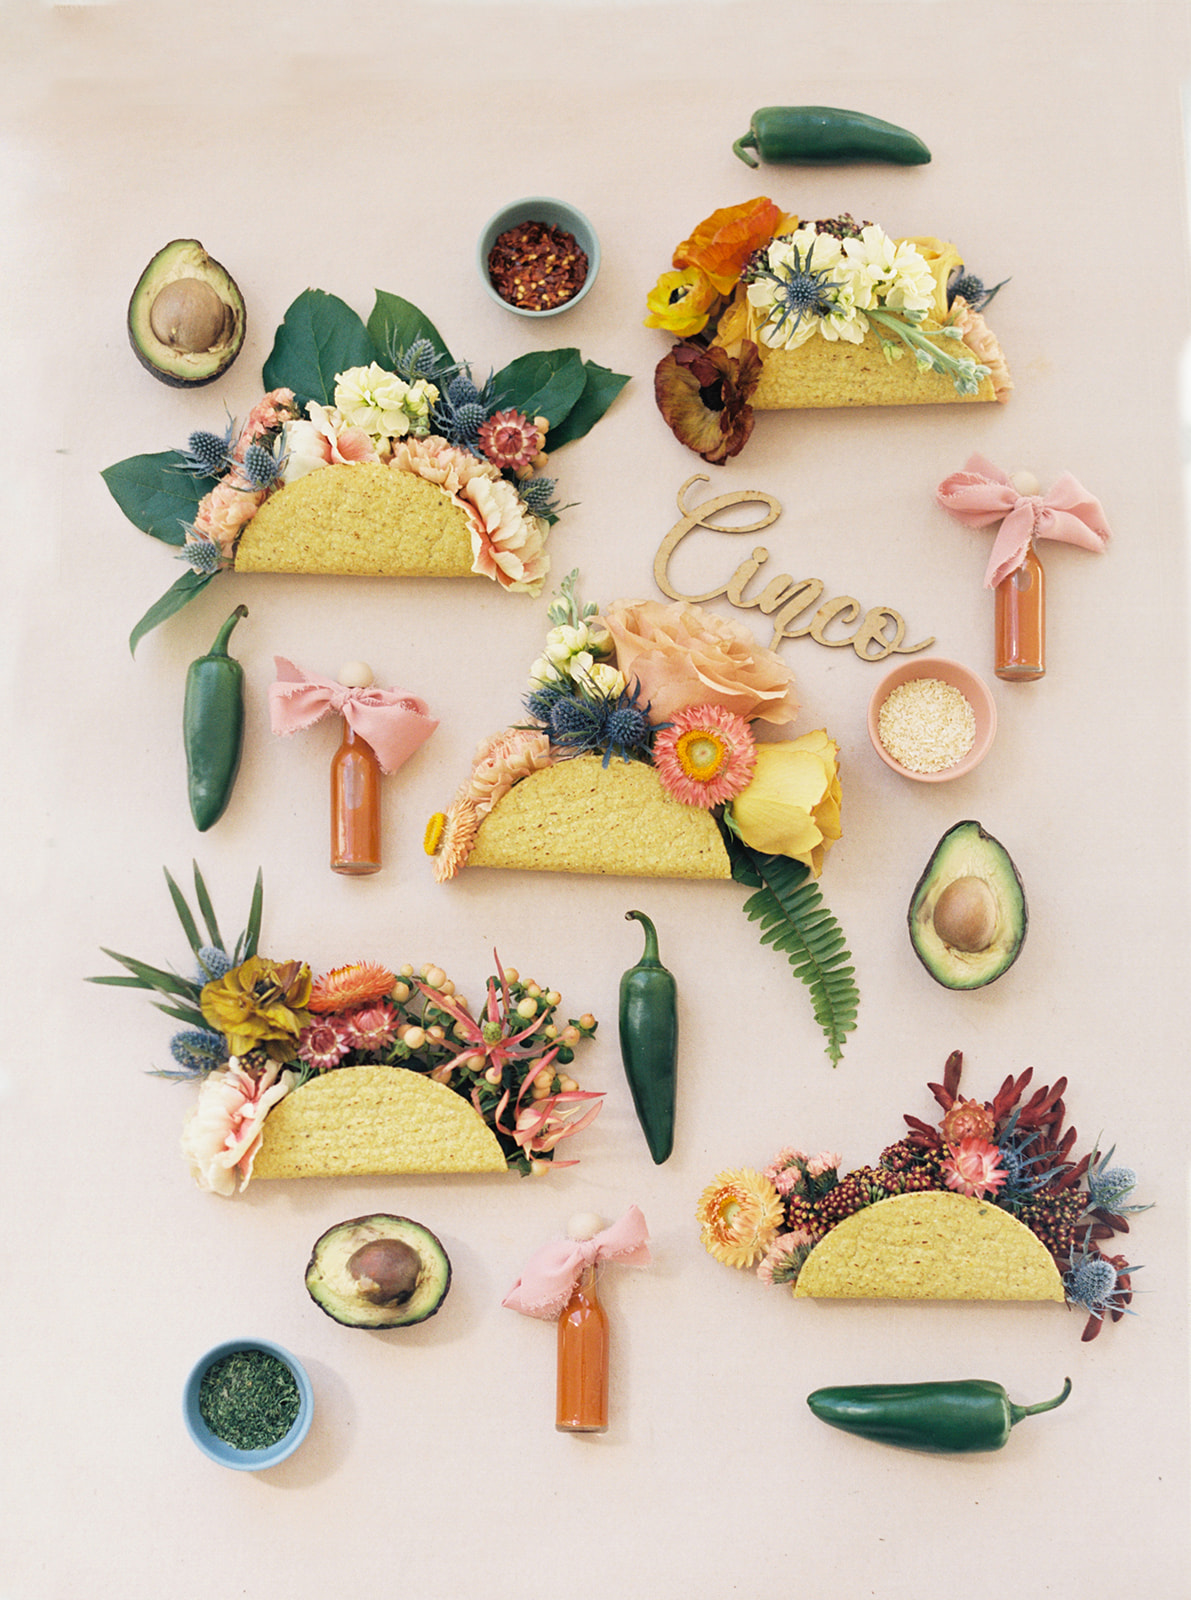 “Taco Bout Five” kids birthday party with Cinco de Mayo theme